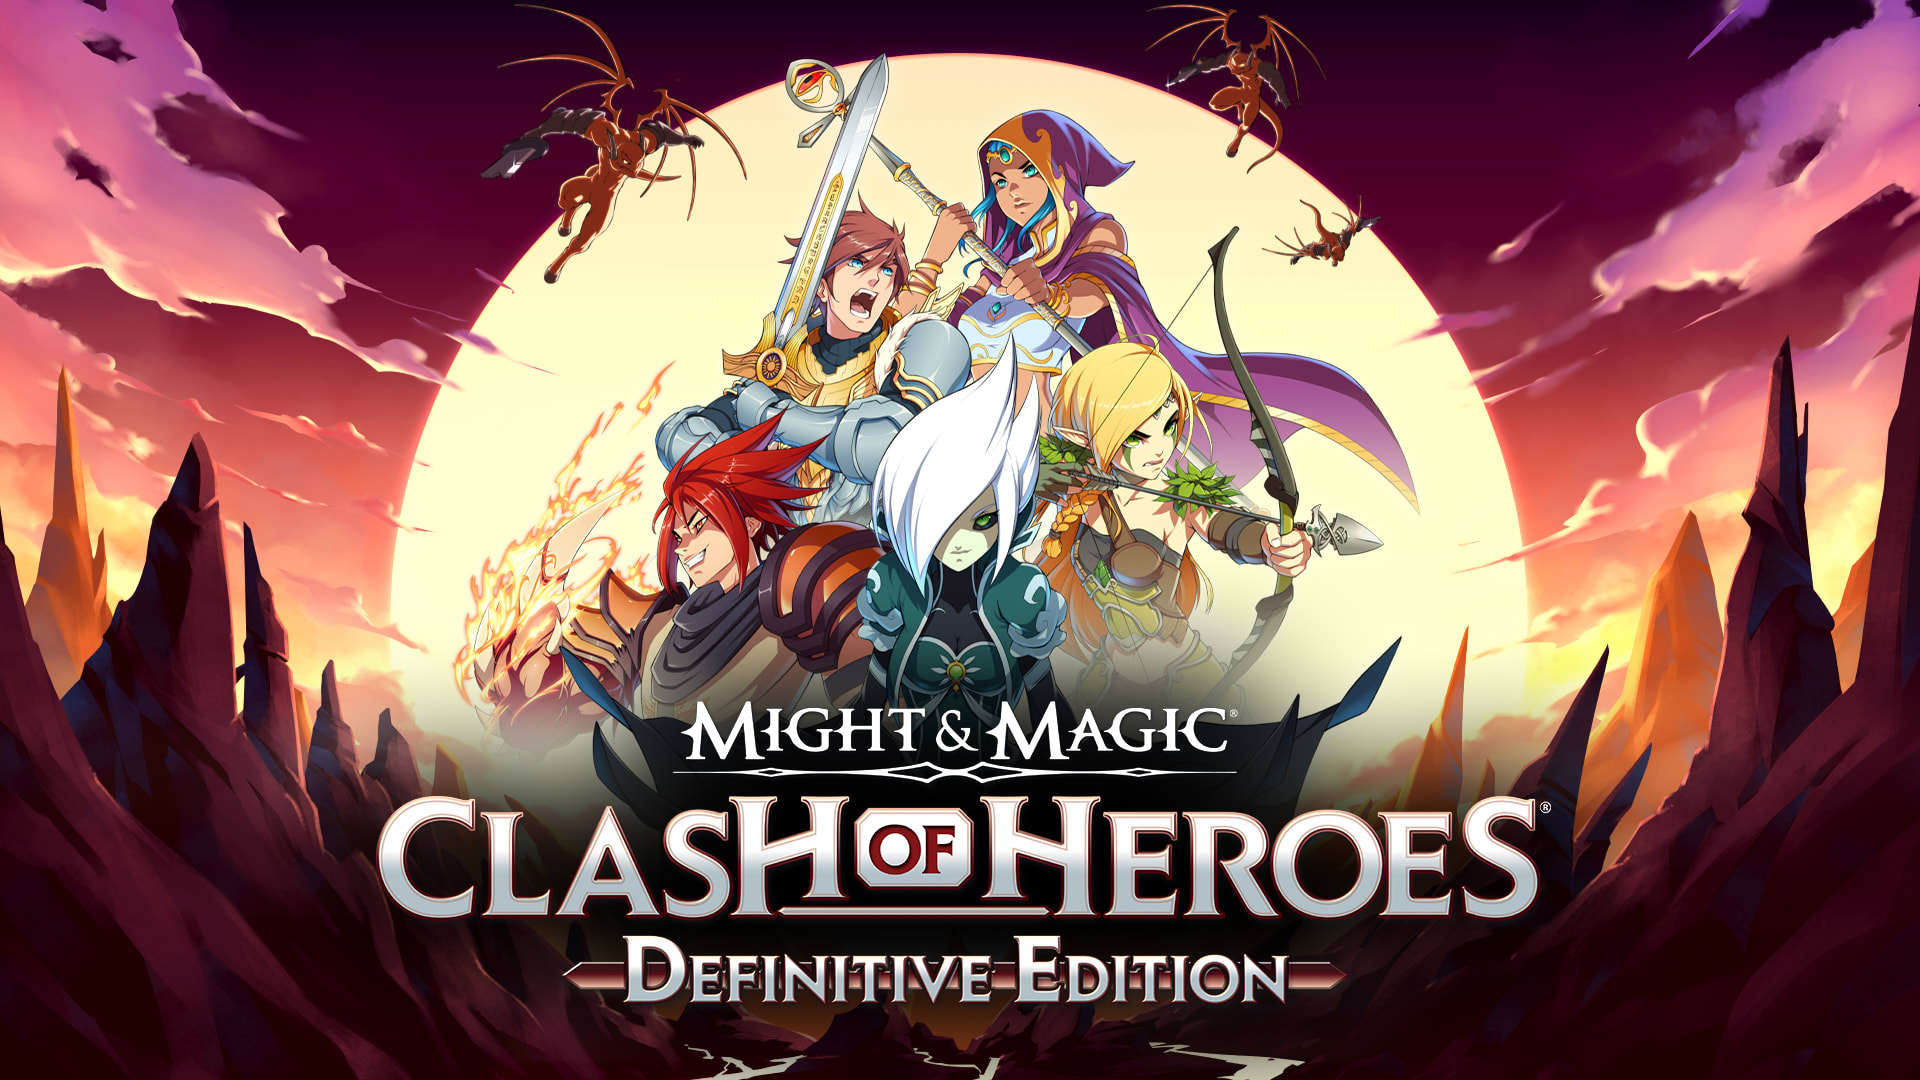 Might & Magic - Clash of Heroes : Definitive Edition